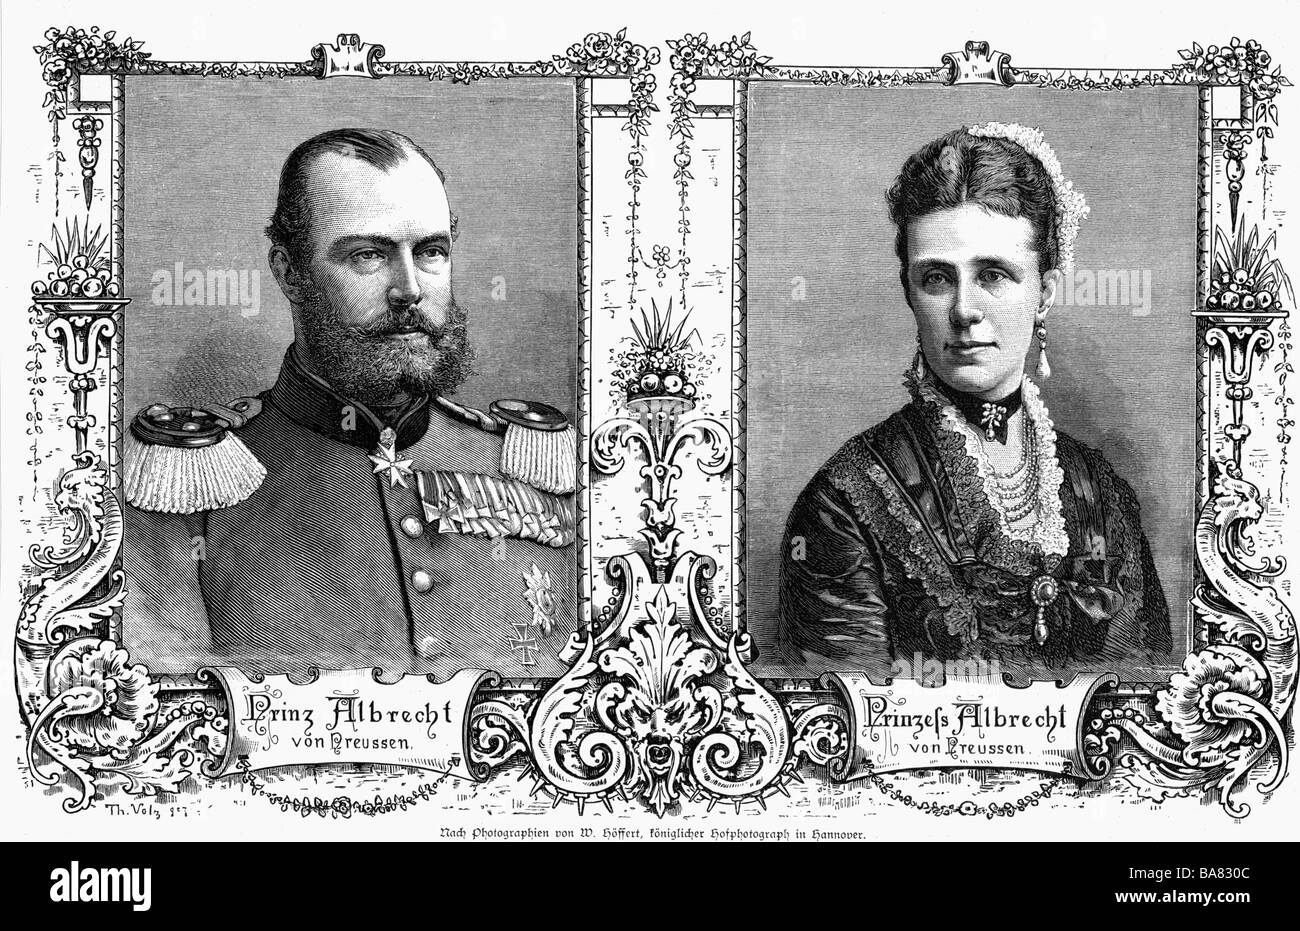 Albert, 8.5.1837 - 13.9.1906, Prince of Prussia, Prussian general, portrait, with wife Princess Marie, wood engraving, circa 1880, , Stock Photo